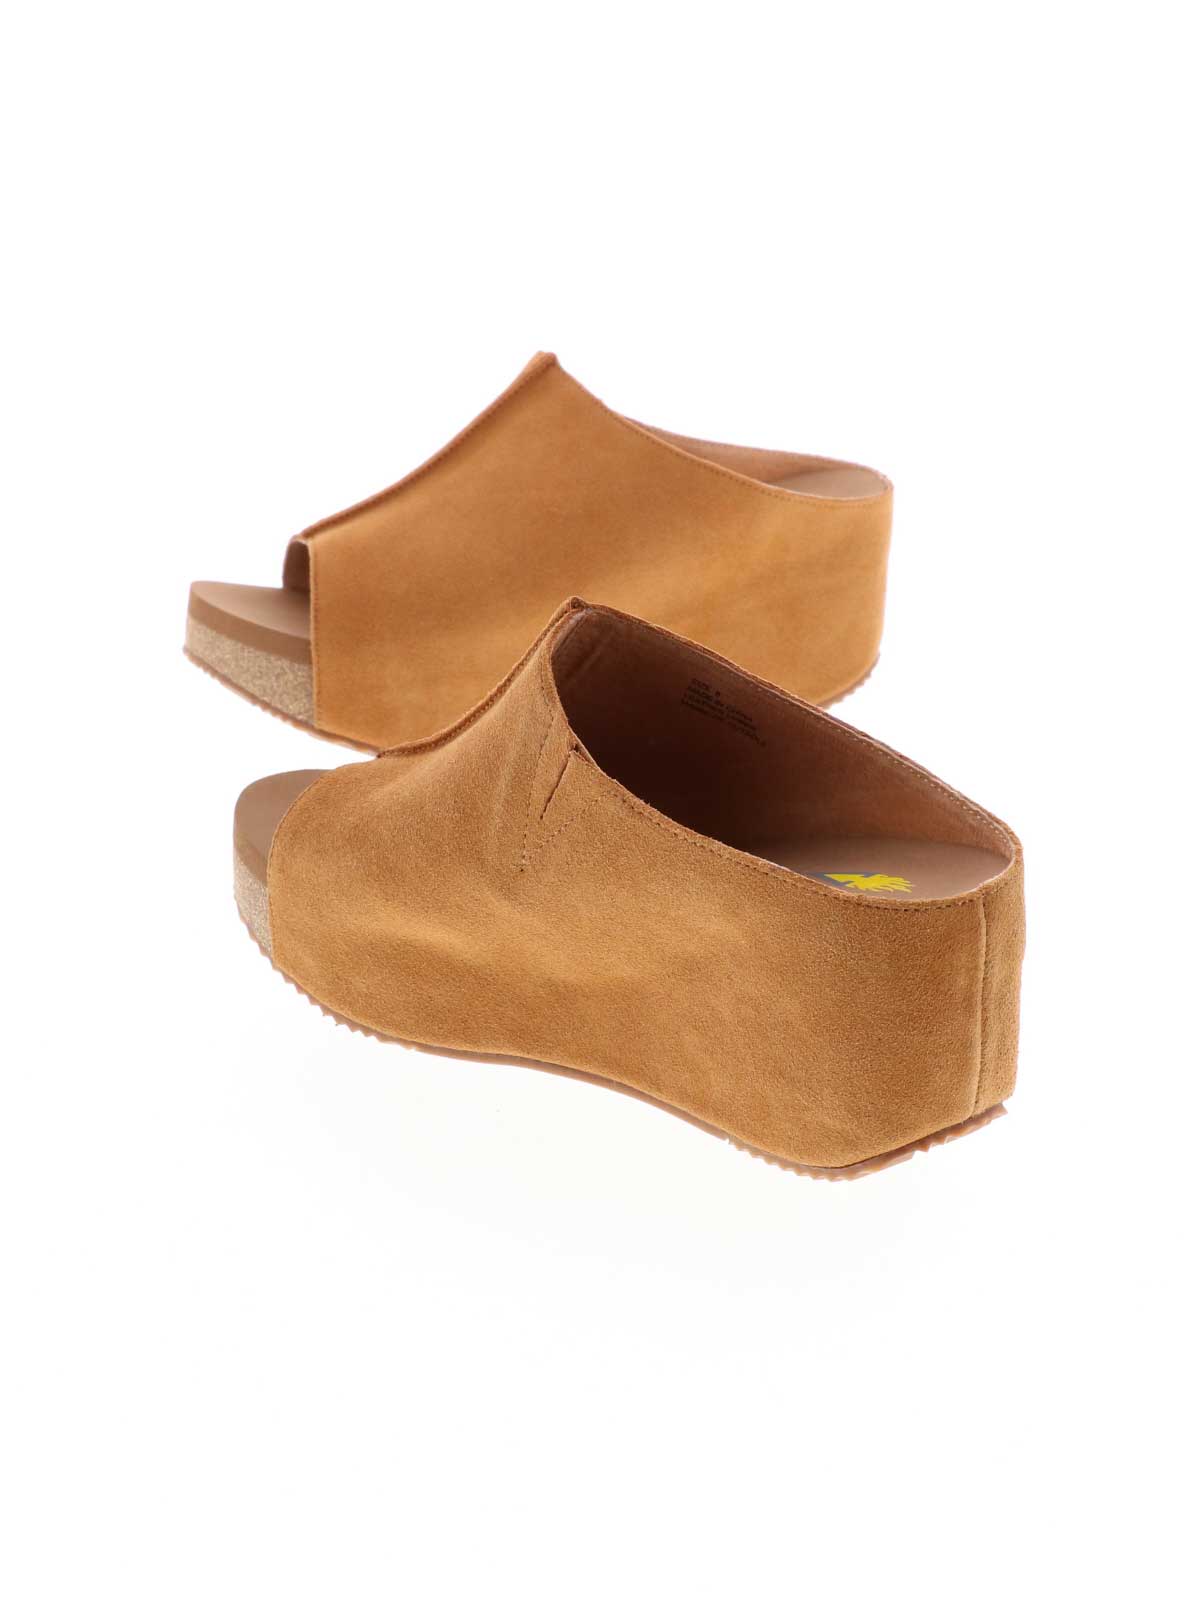 SLIP ON PEEP TOE WEDGE - Suede, hair calf, metallic tonal camo, faux snake upper with butted center seam and inner elastic gore for perfect fit - Slip on design - Leather lining - Signature ultra comfort EVA insole - Rubber traction outsole - Approx. 0.75" platform height - Approx. 2.75" wedge heel height tan4